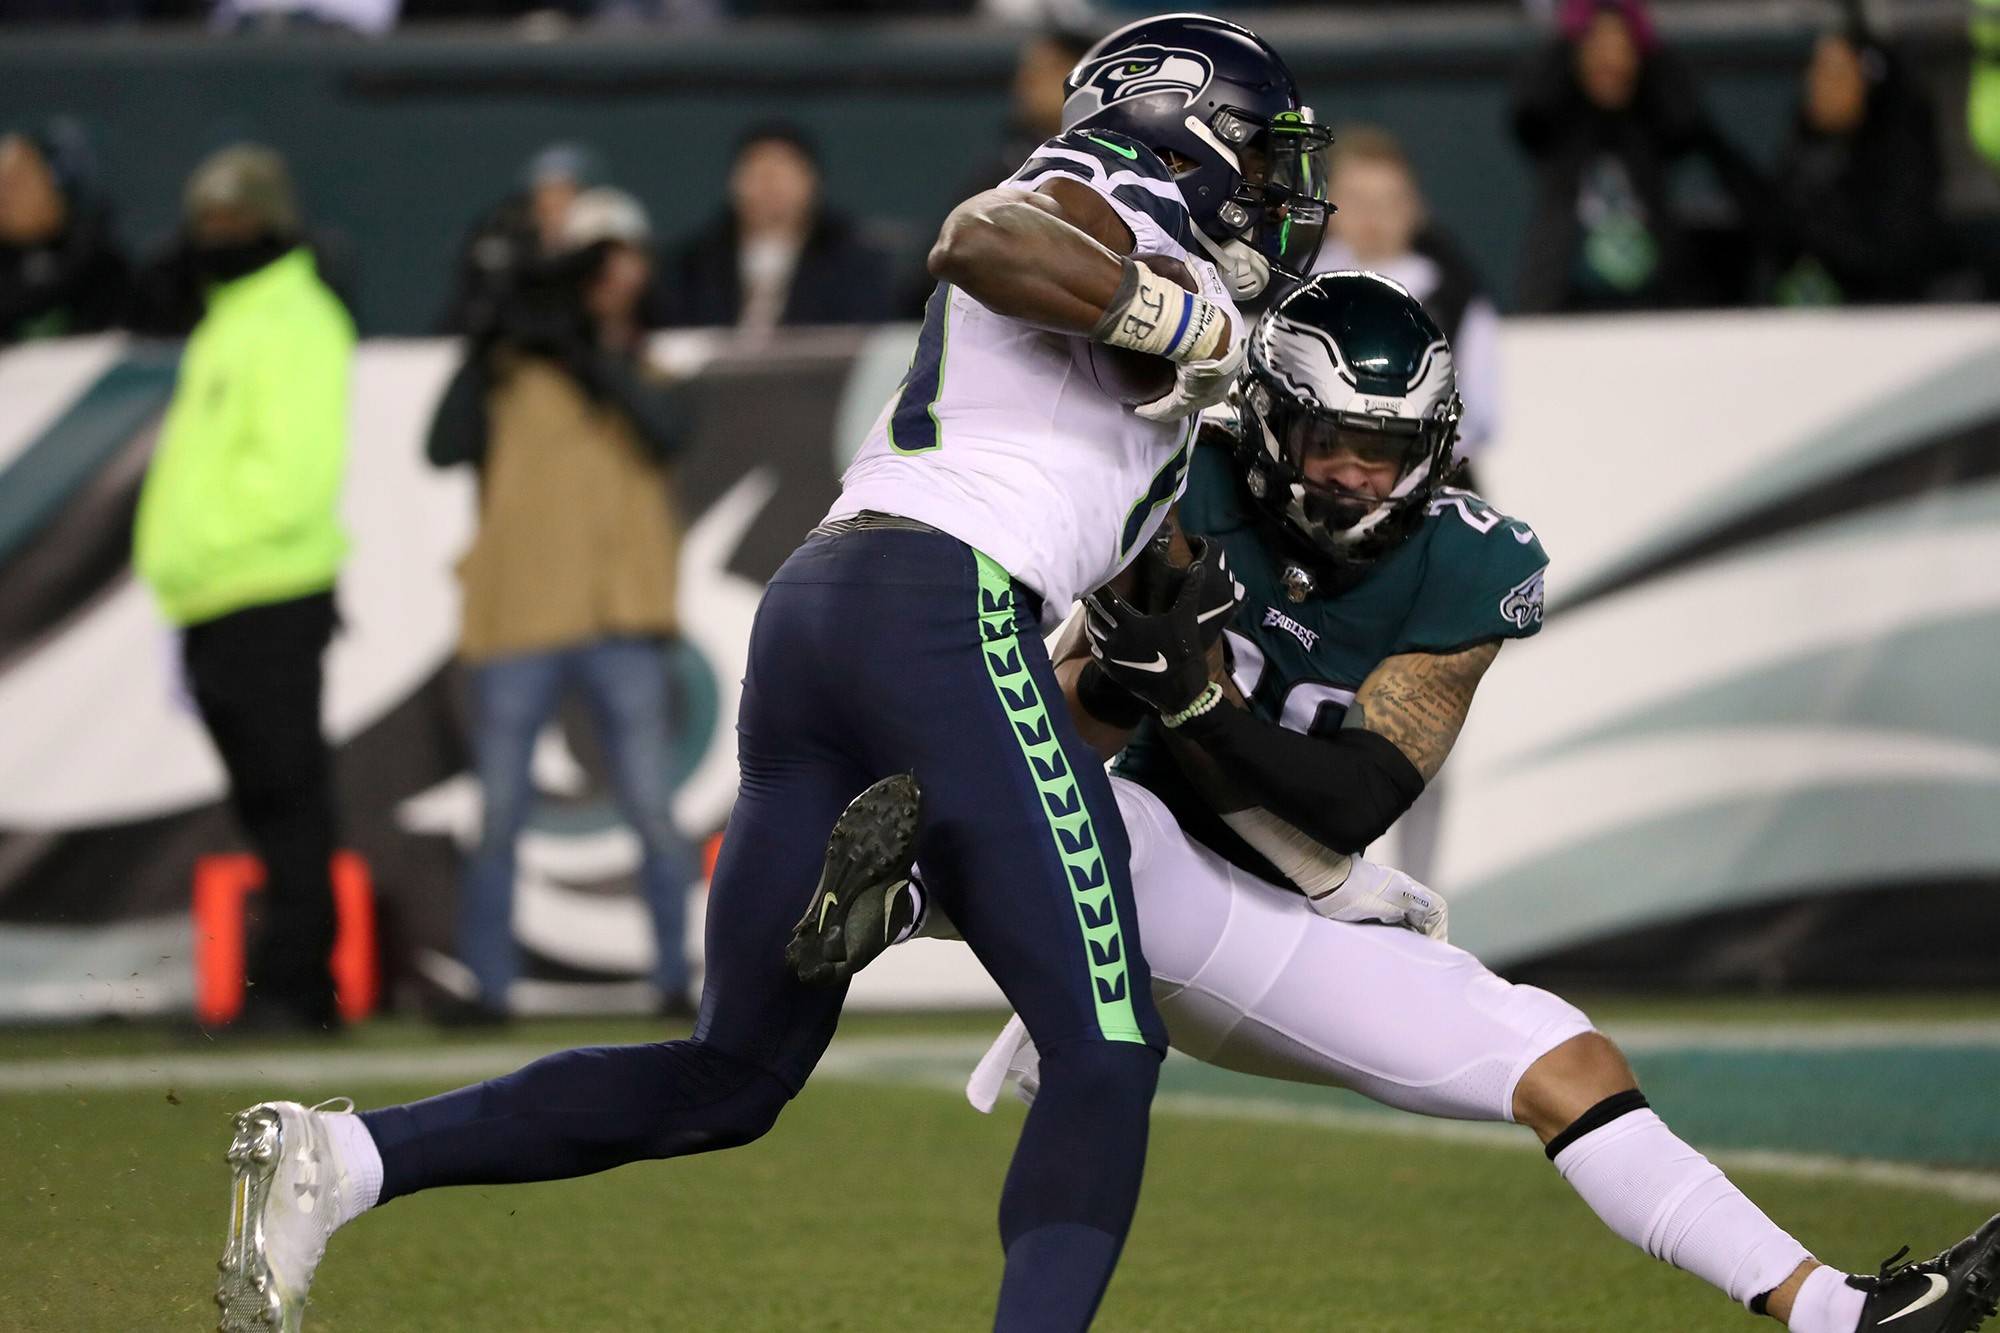 Philadelphia Eagles cornerback Avonte Maddox tries to take down Seattle Seahawks wide receiver D.K. Metcalf after a 53-yard reception on Sunday, Jan. 5, 2020. (Michael Bryant/The Philadelphia Inquirer/TNS)